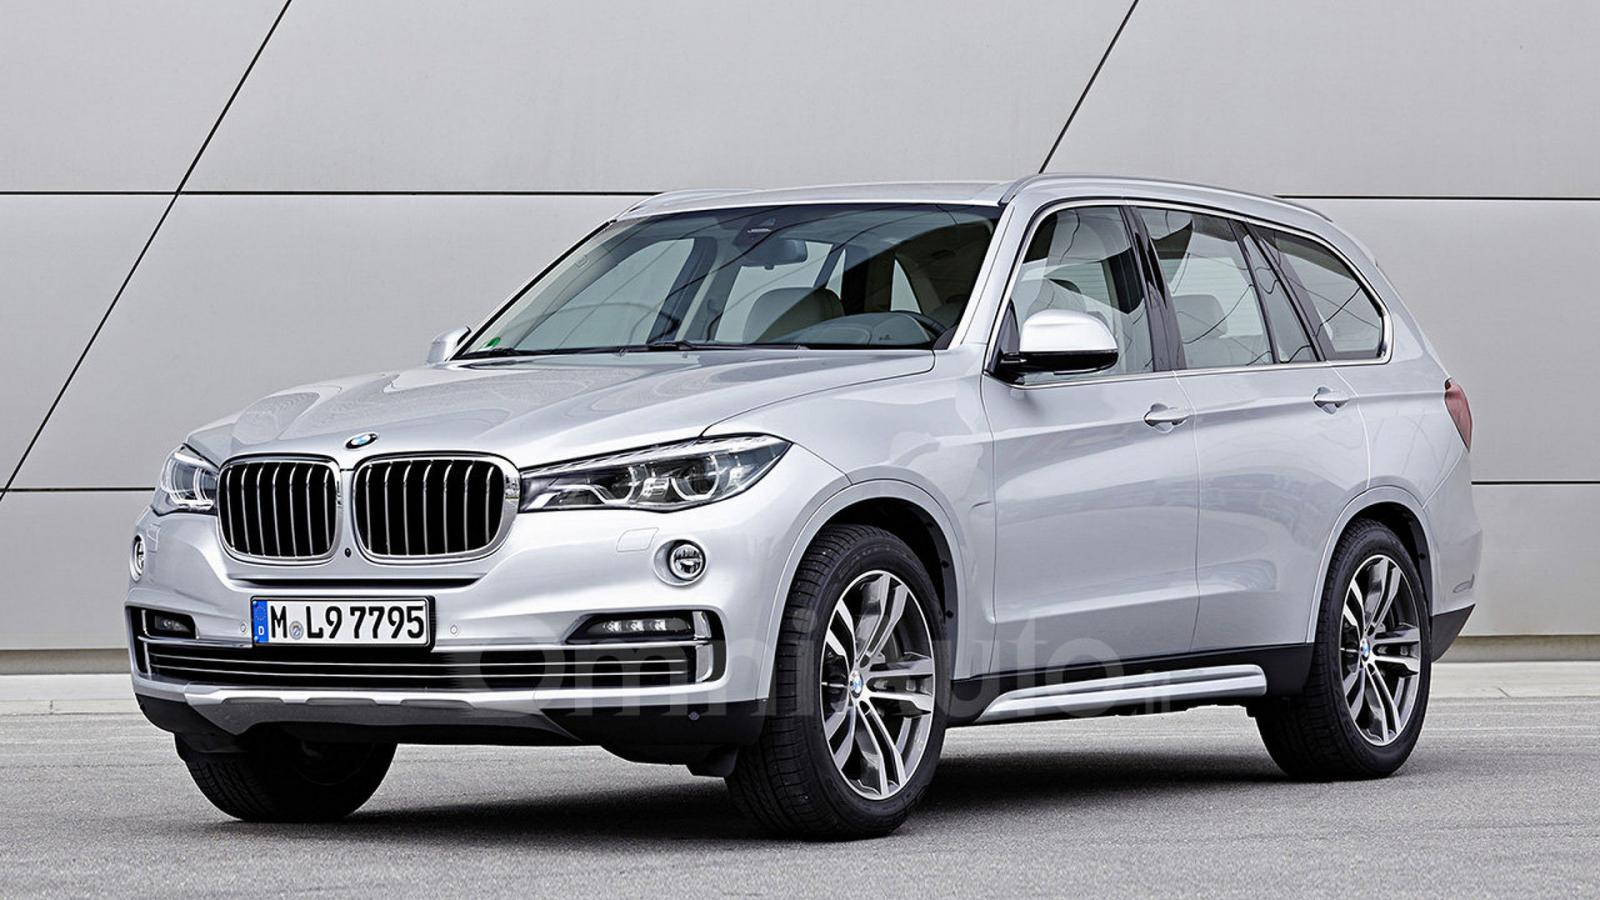 BMW X7 Launched in New Renderings, Confirmed for Official Launch in 2019